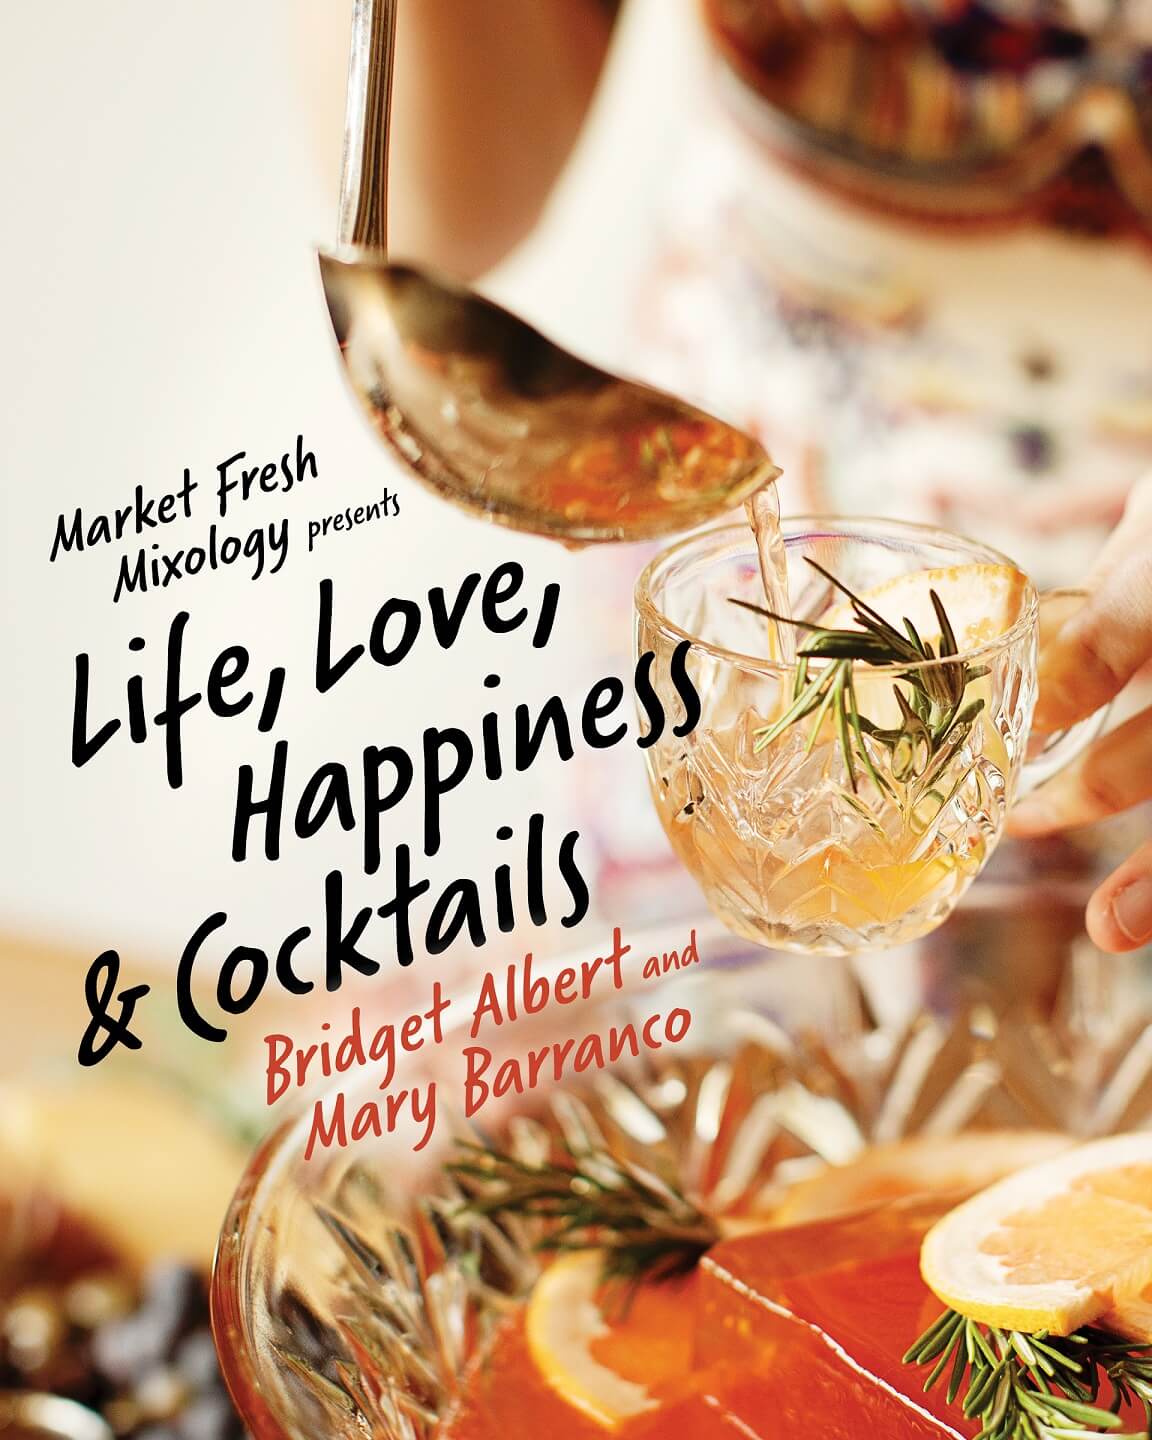 New Book: Life, Love, Happiness & Cocktails